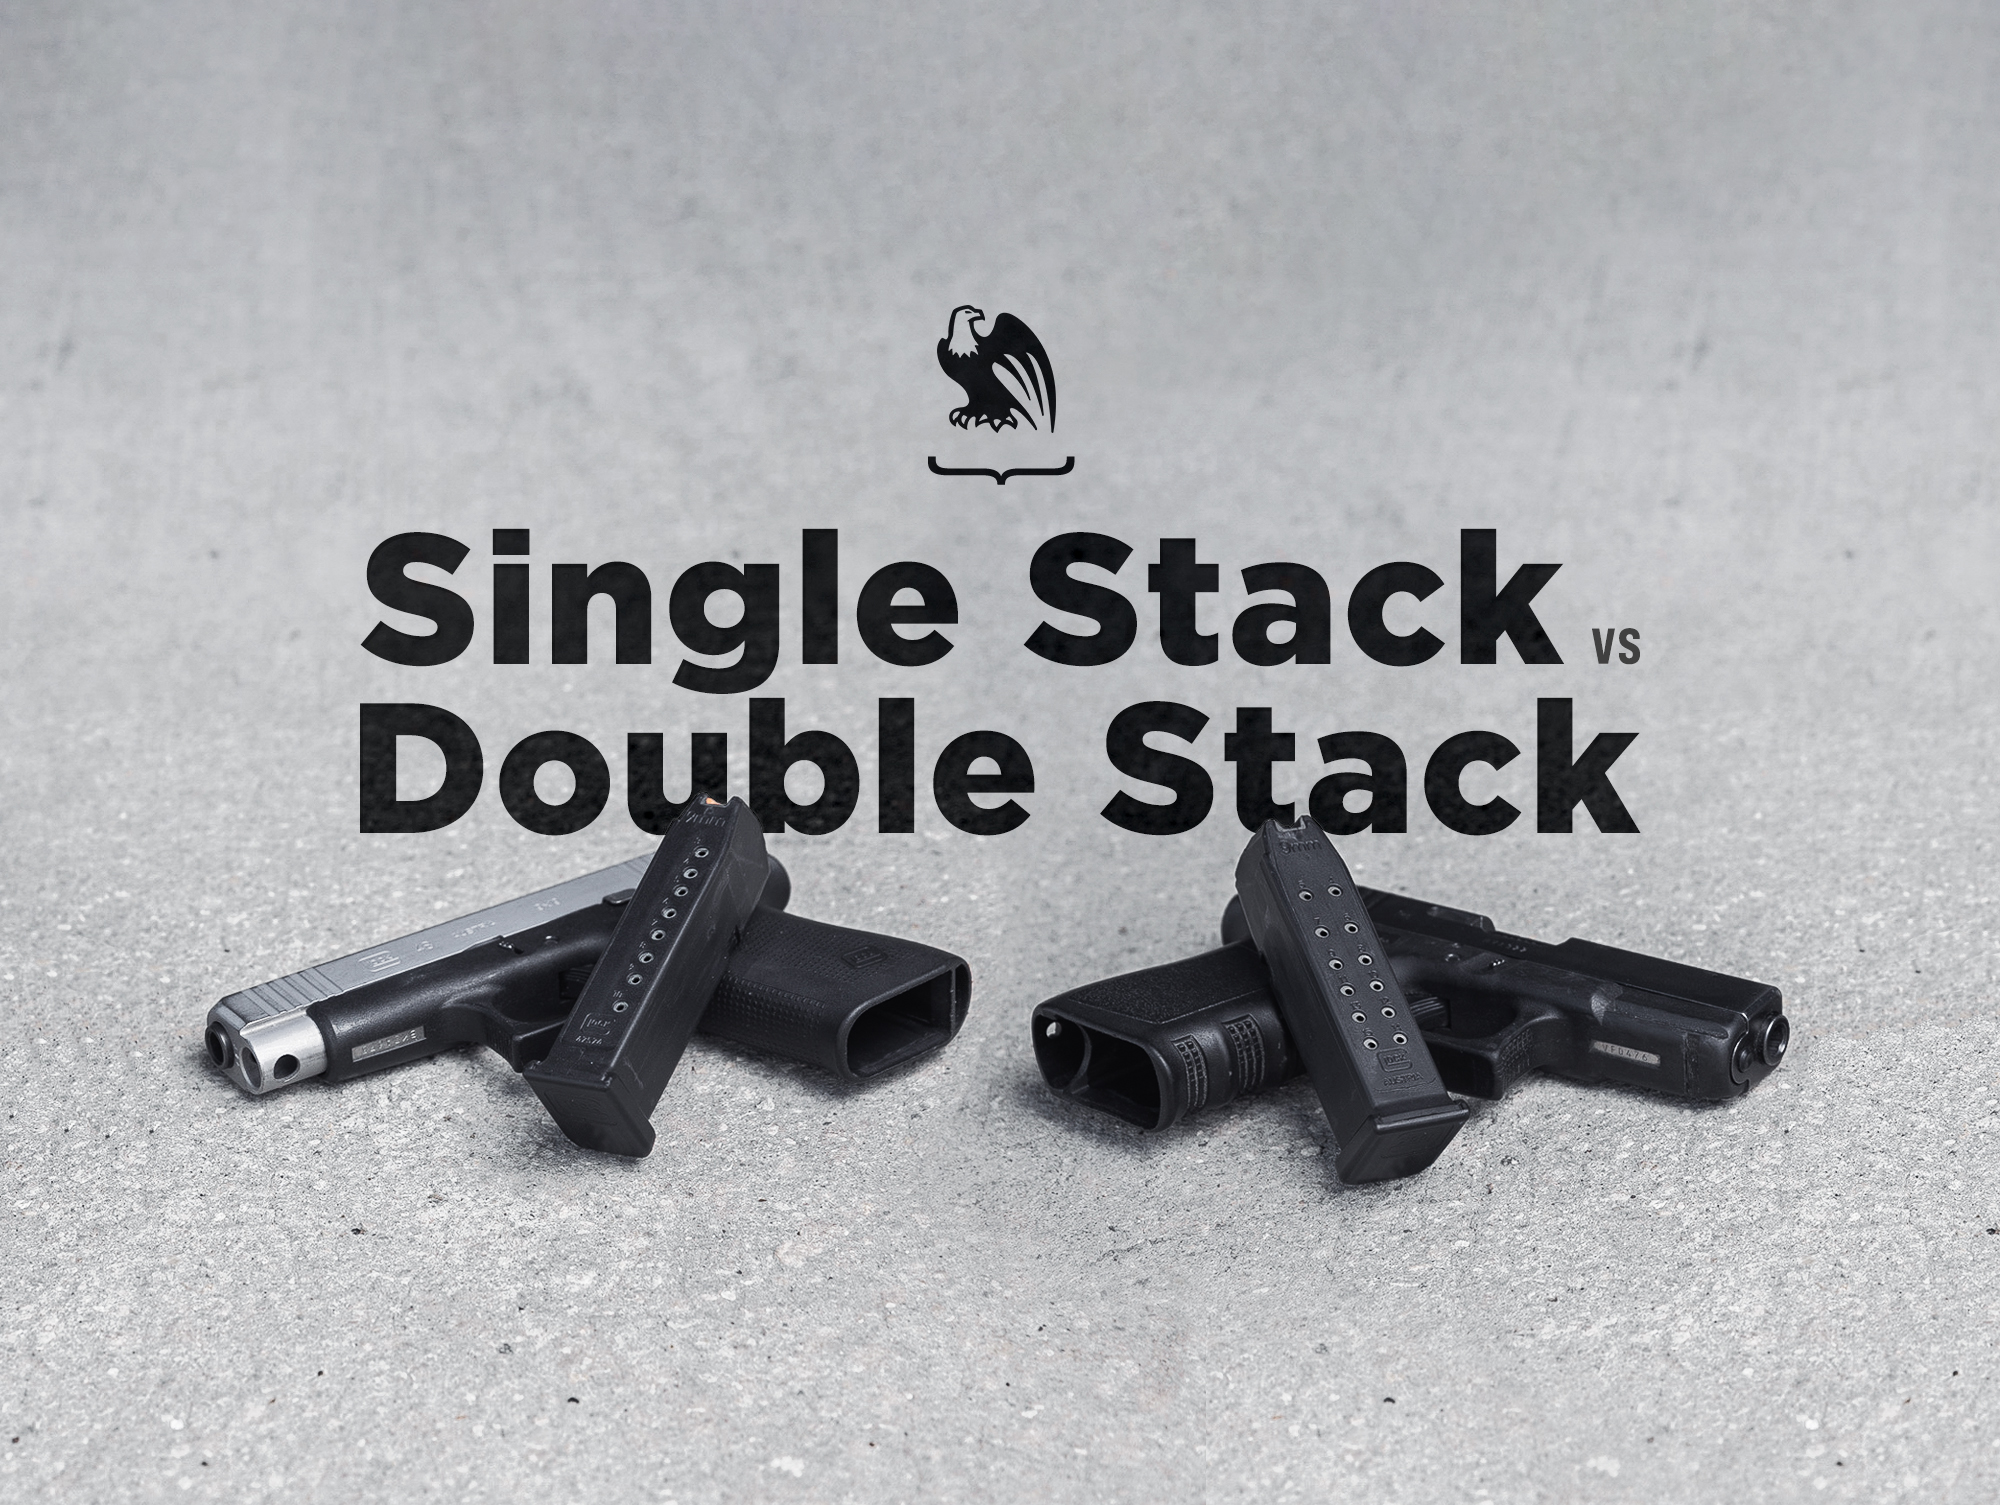 https://cdn11.bigcommerce.com/s-f6h7auv/product_images/uploaded_images/single-stack-vs-double-stack.jpg